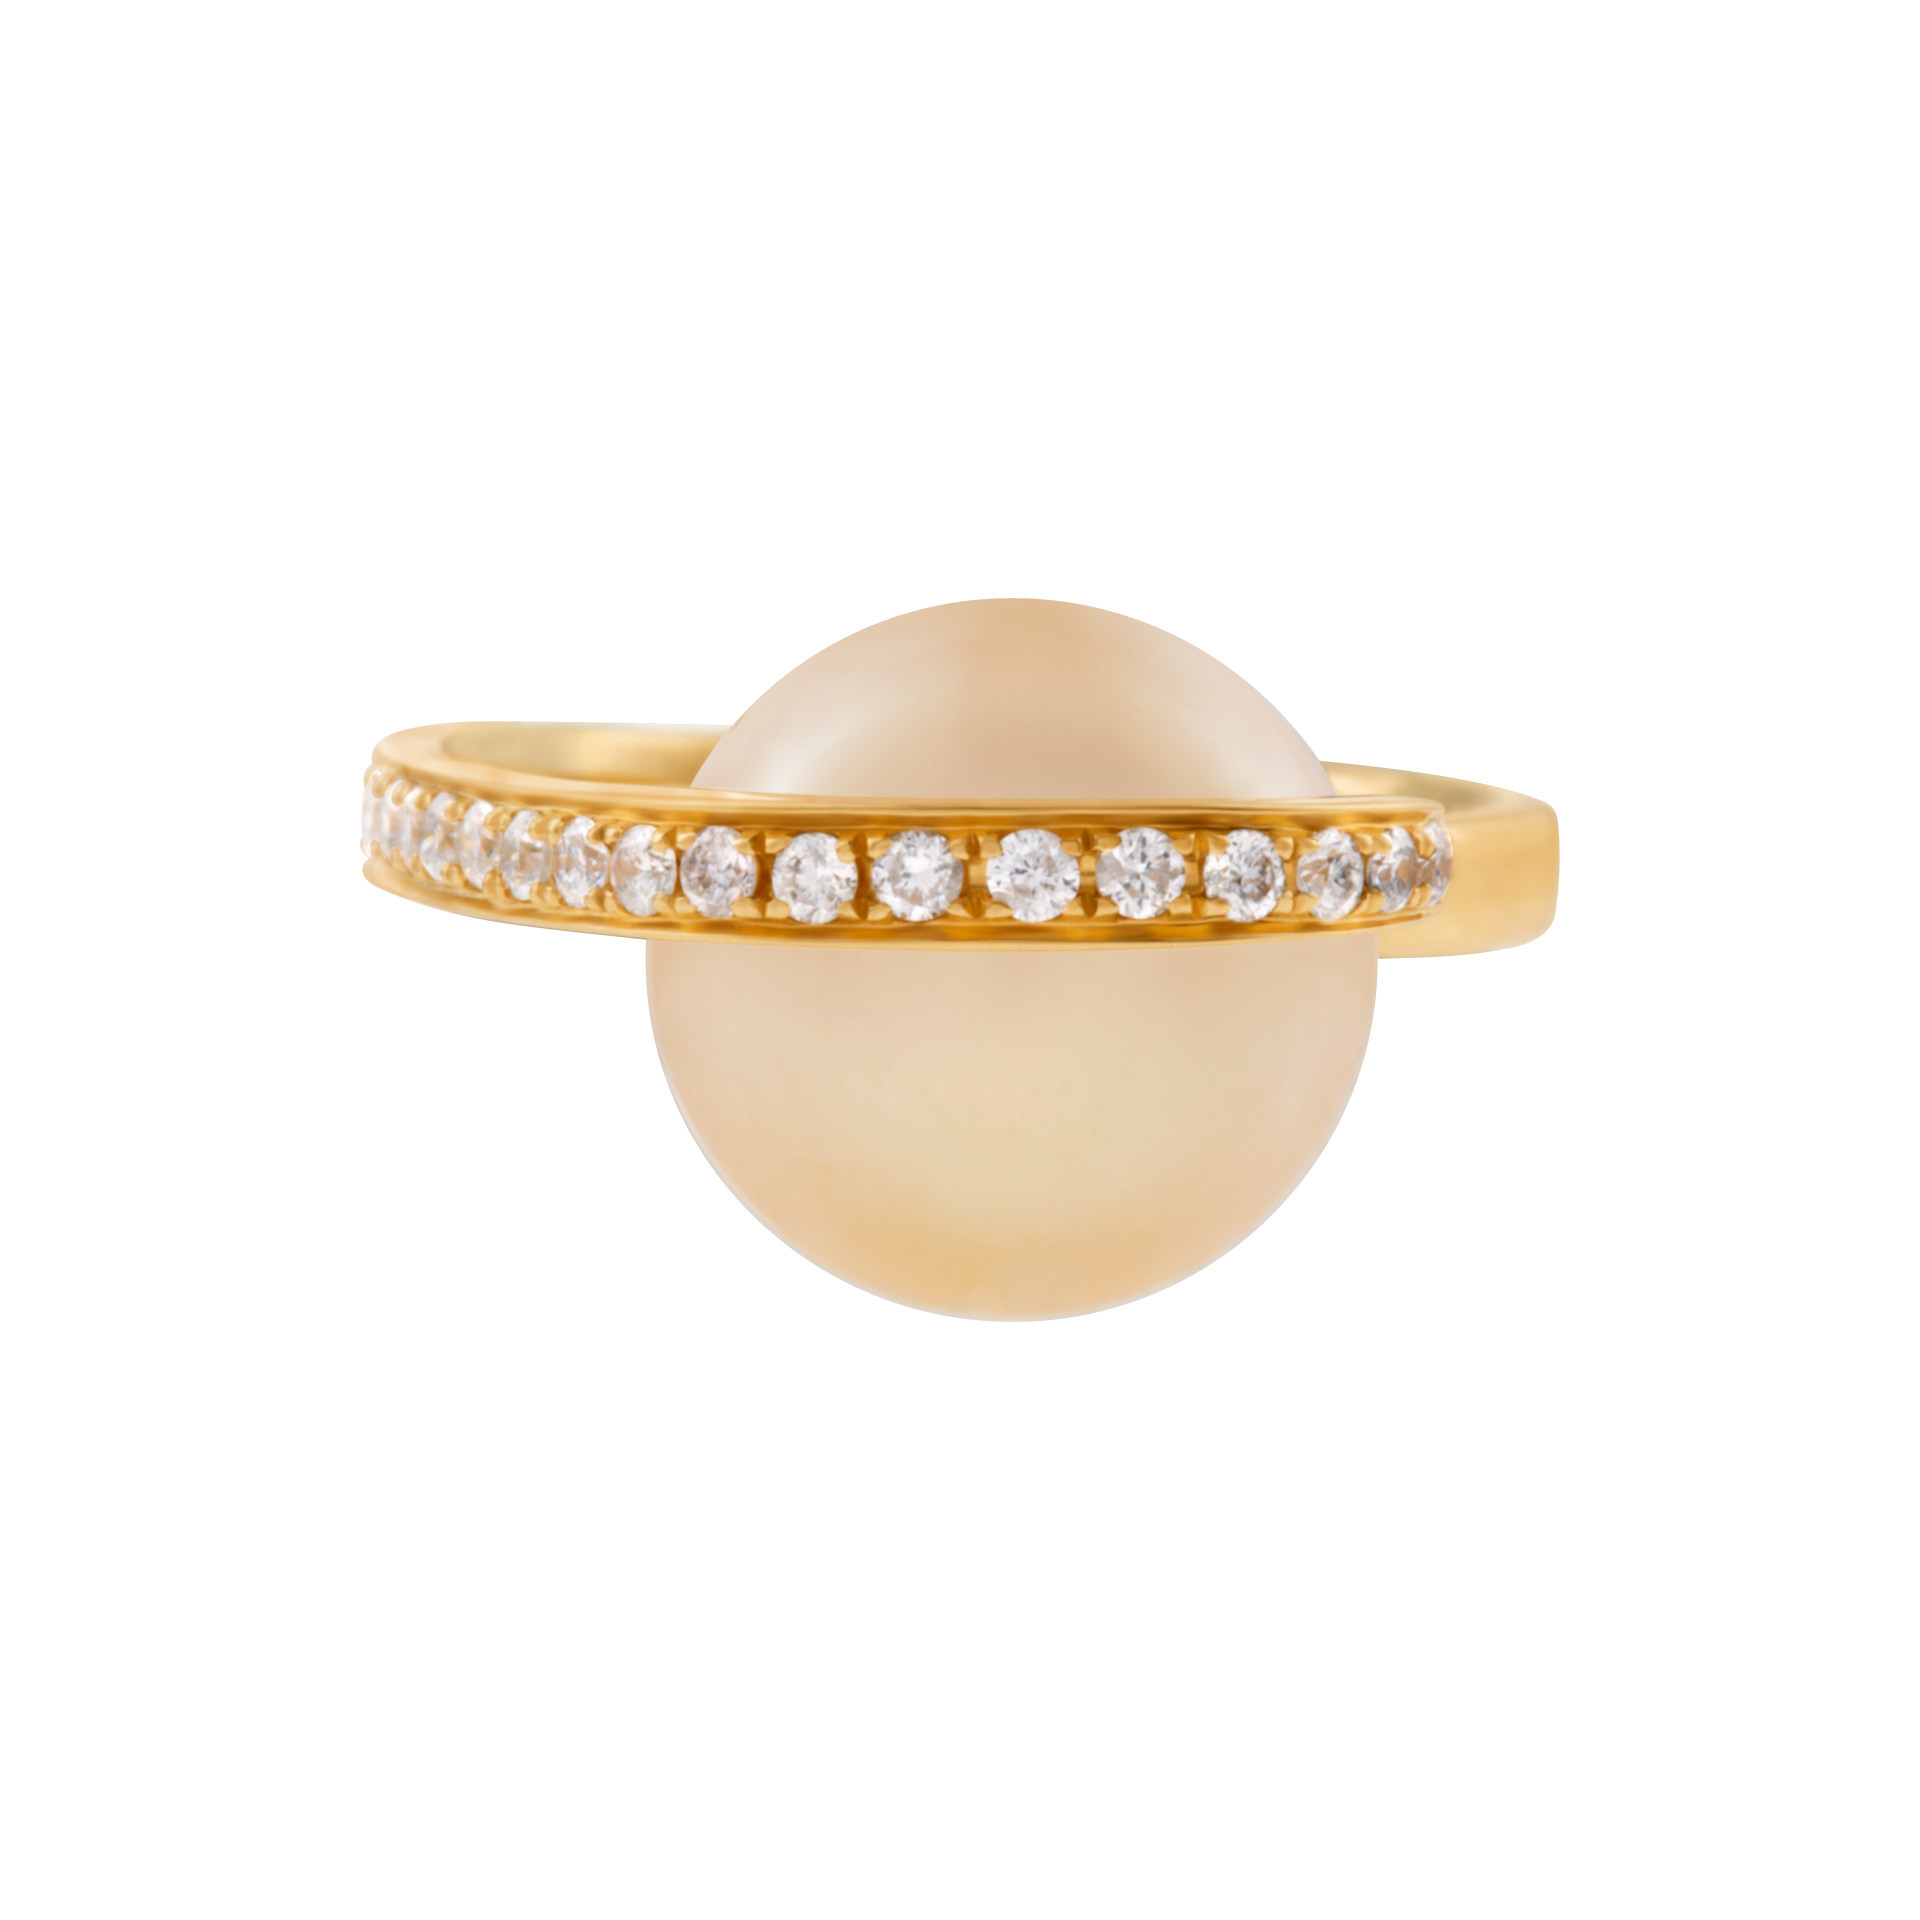 18K yellow gold ring with golden pearl and 0.30 cts in diamonds. Size 7.5